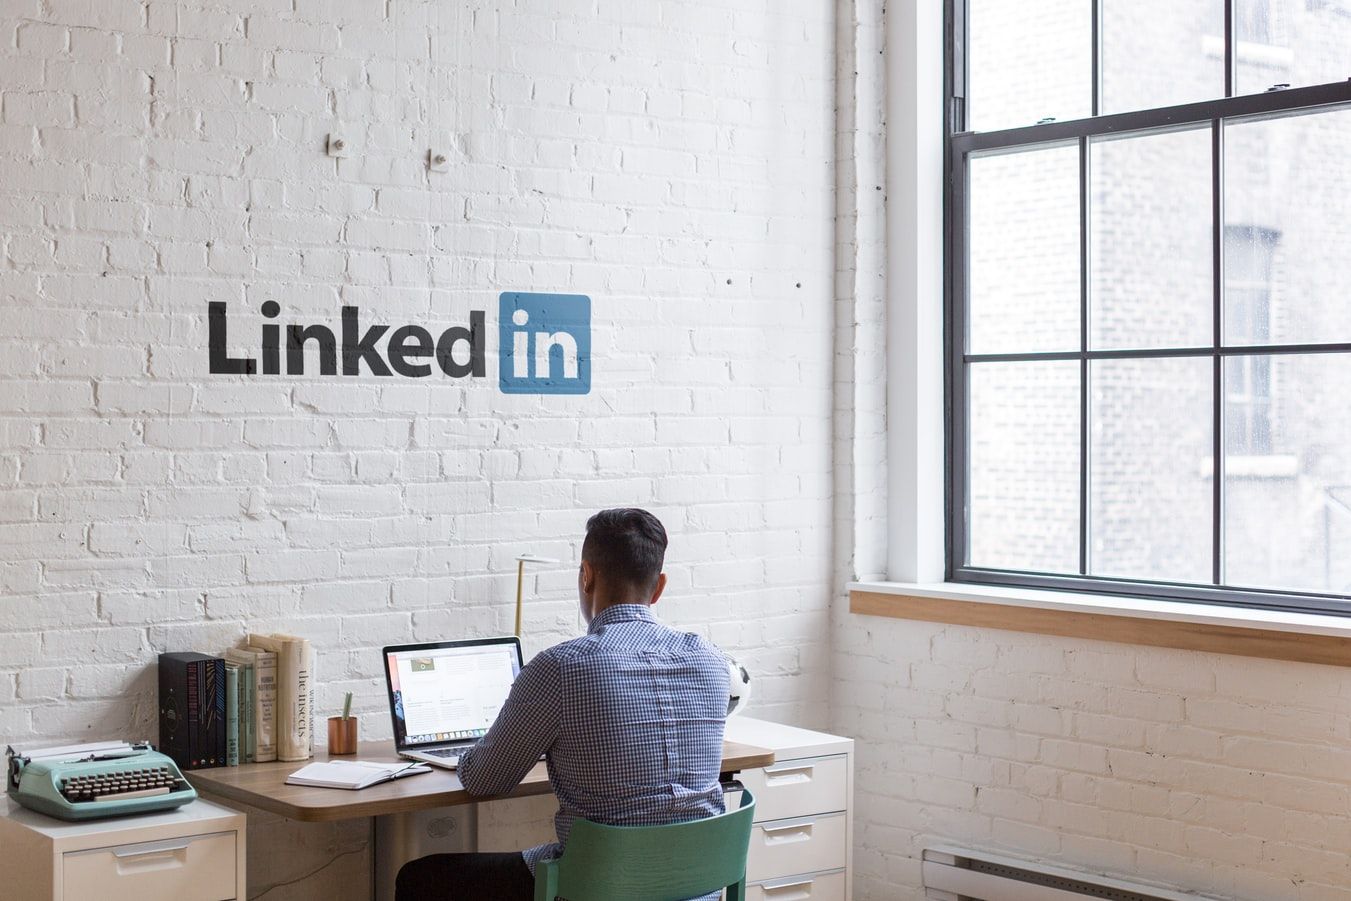 LinkedIn gives staff week off for well-being